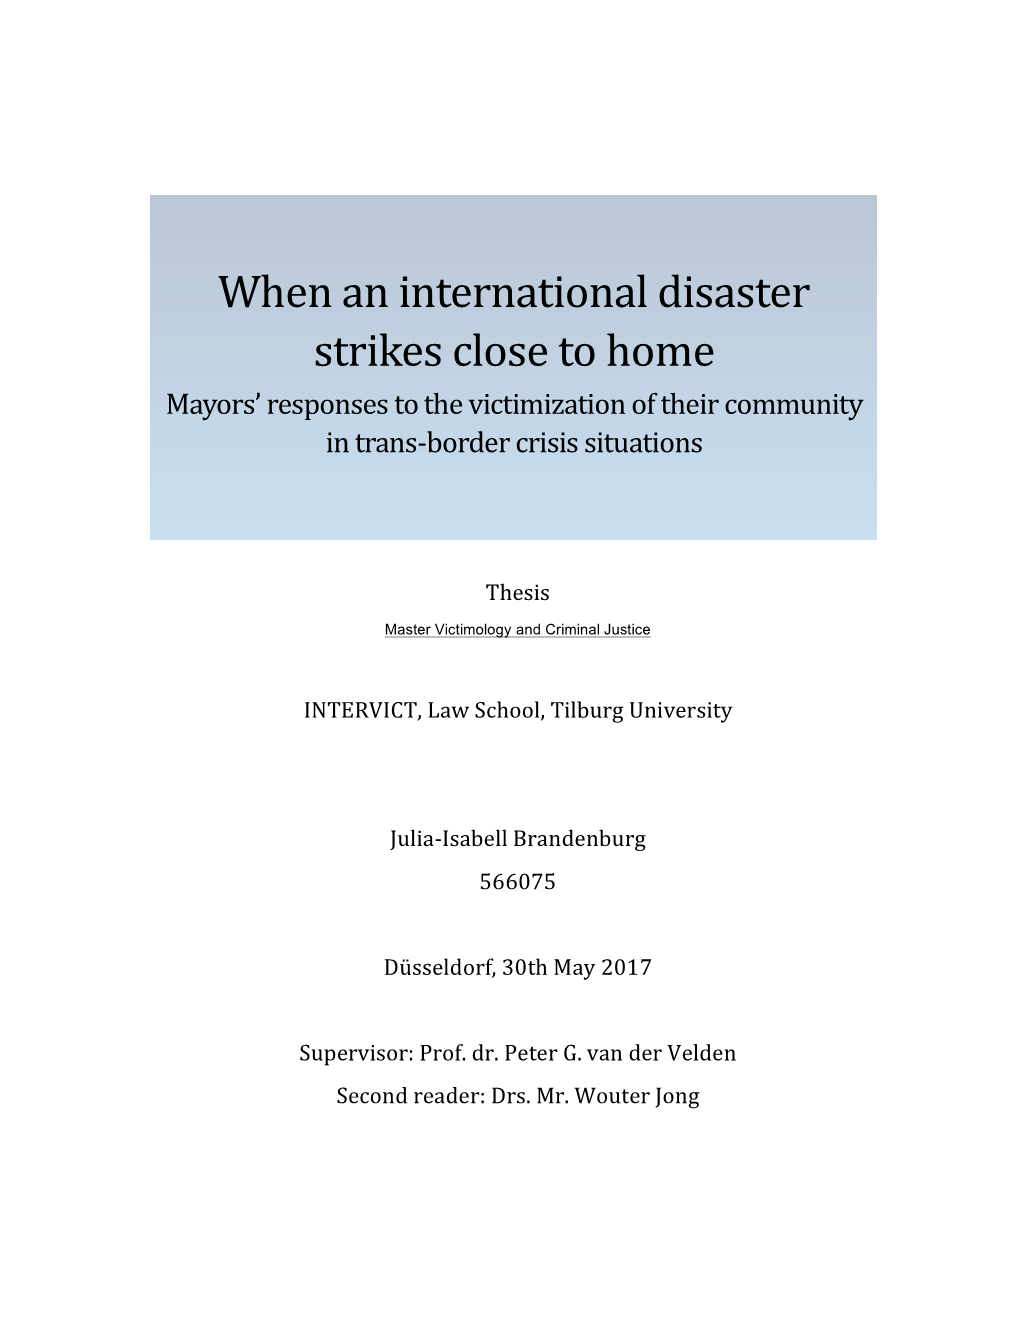 When an International Disaster Strikes Close to Home Mayors’ Responses to the Victimization of Their Community in Trans-Border Crisis Situations